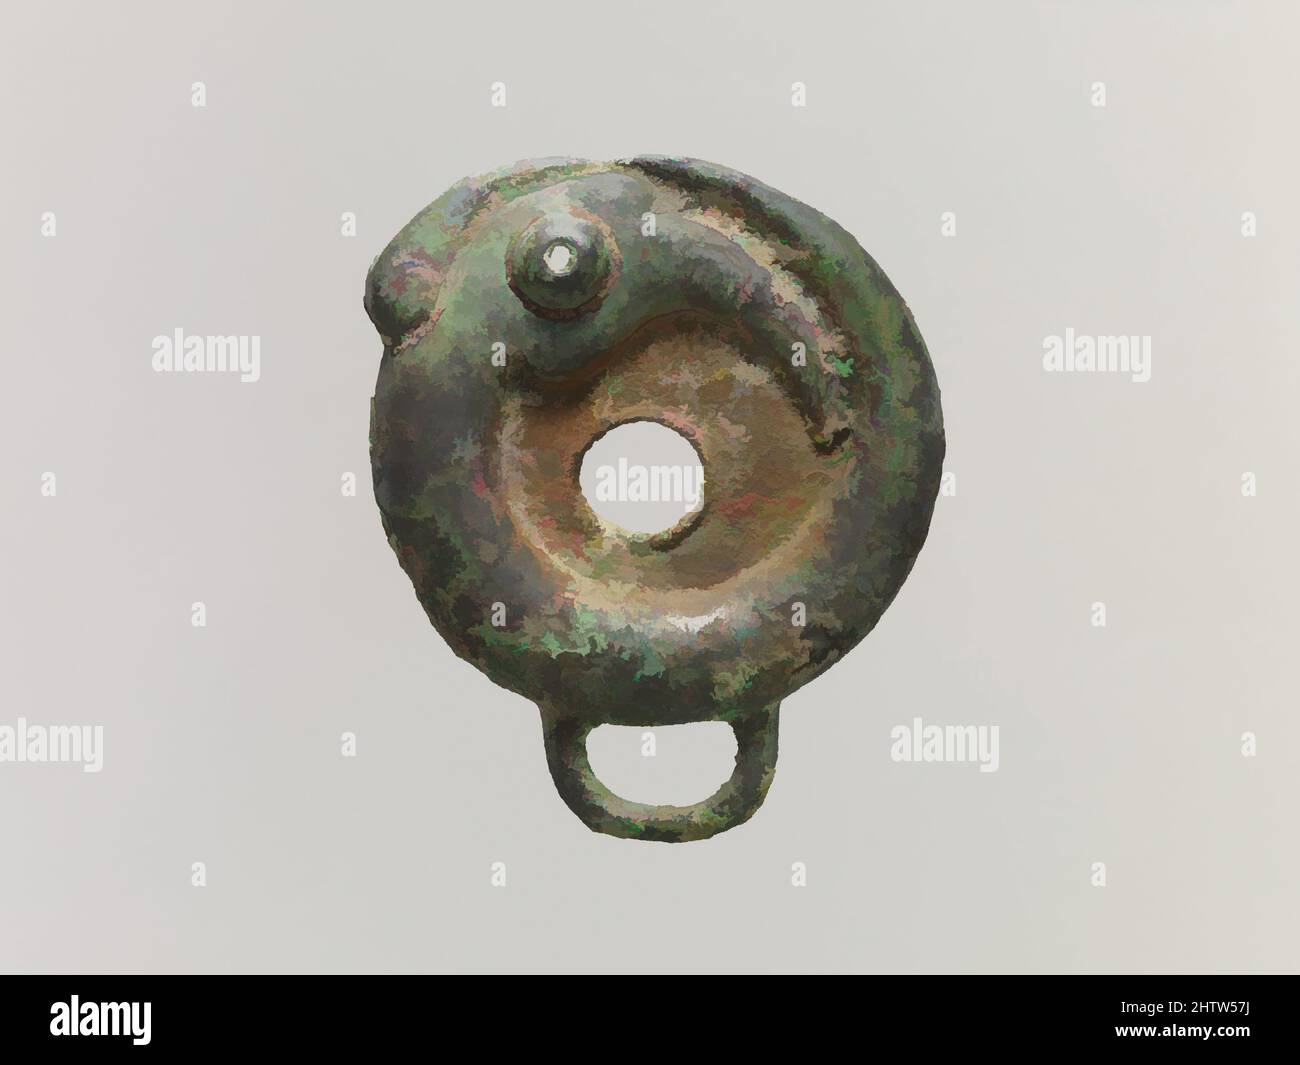 Art inspired by Bridle Cheekpiece, Western Zhou dynasty (1046–771 B.C.), 10th–9th century B.C., China, Bronze, H. 3 3/4 in. (9.5 cm); W. 3 in. (7.6 cm), Metalwork, Classic works modernized by Artotop with a splash of modernity. Shapes, color and value, eye-catching visual impact on art. Emotions through freedom of artworks in a contemporary way. A timeless message pursuing a wildly creative new direction. Artists turning to the digital medium and creating the Artotop NFT Stock Photo